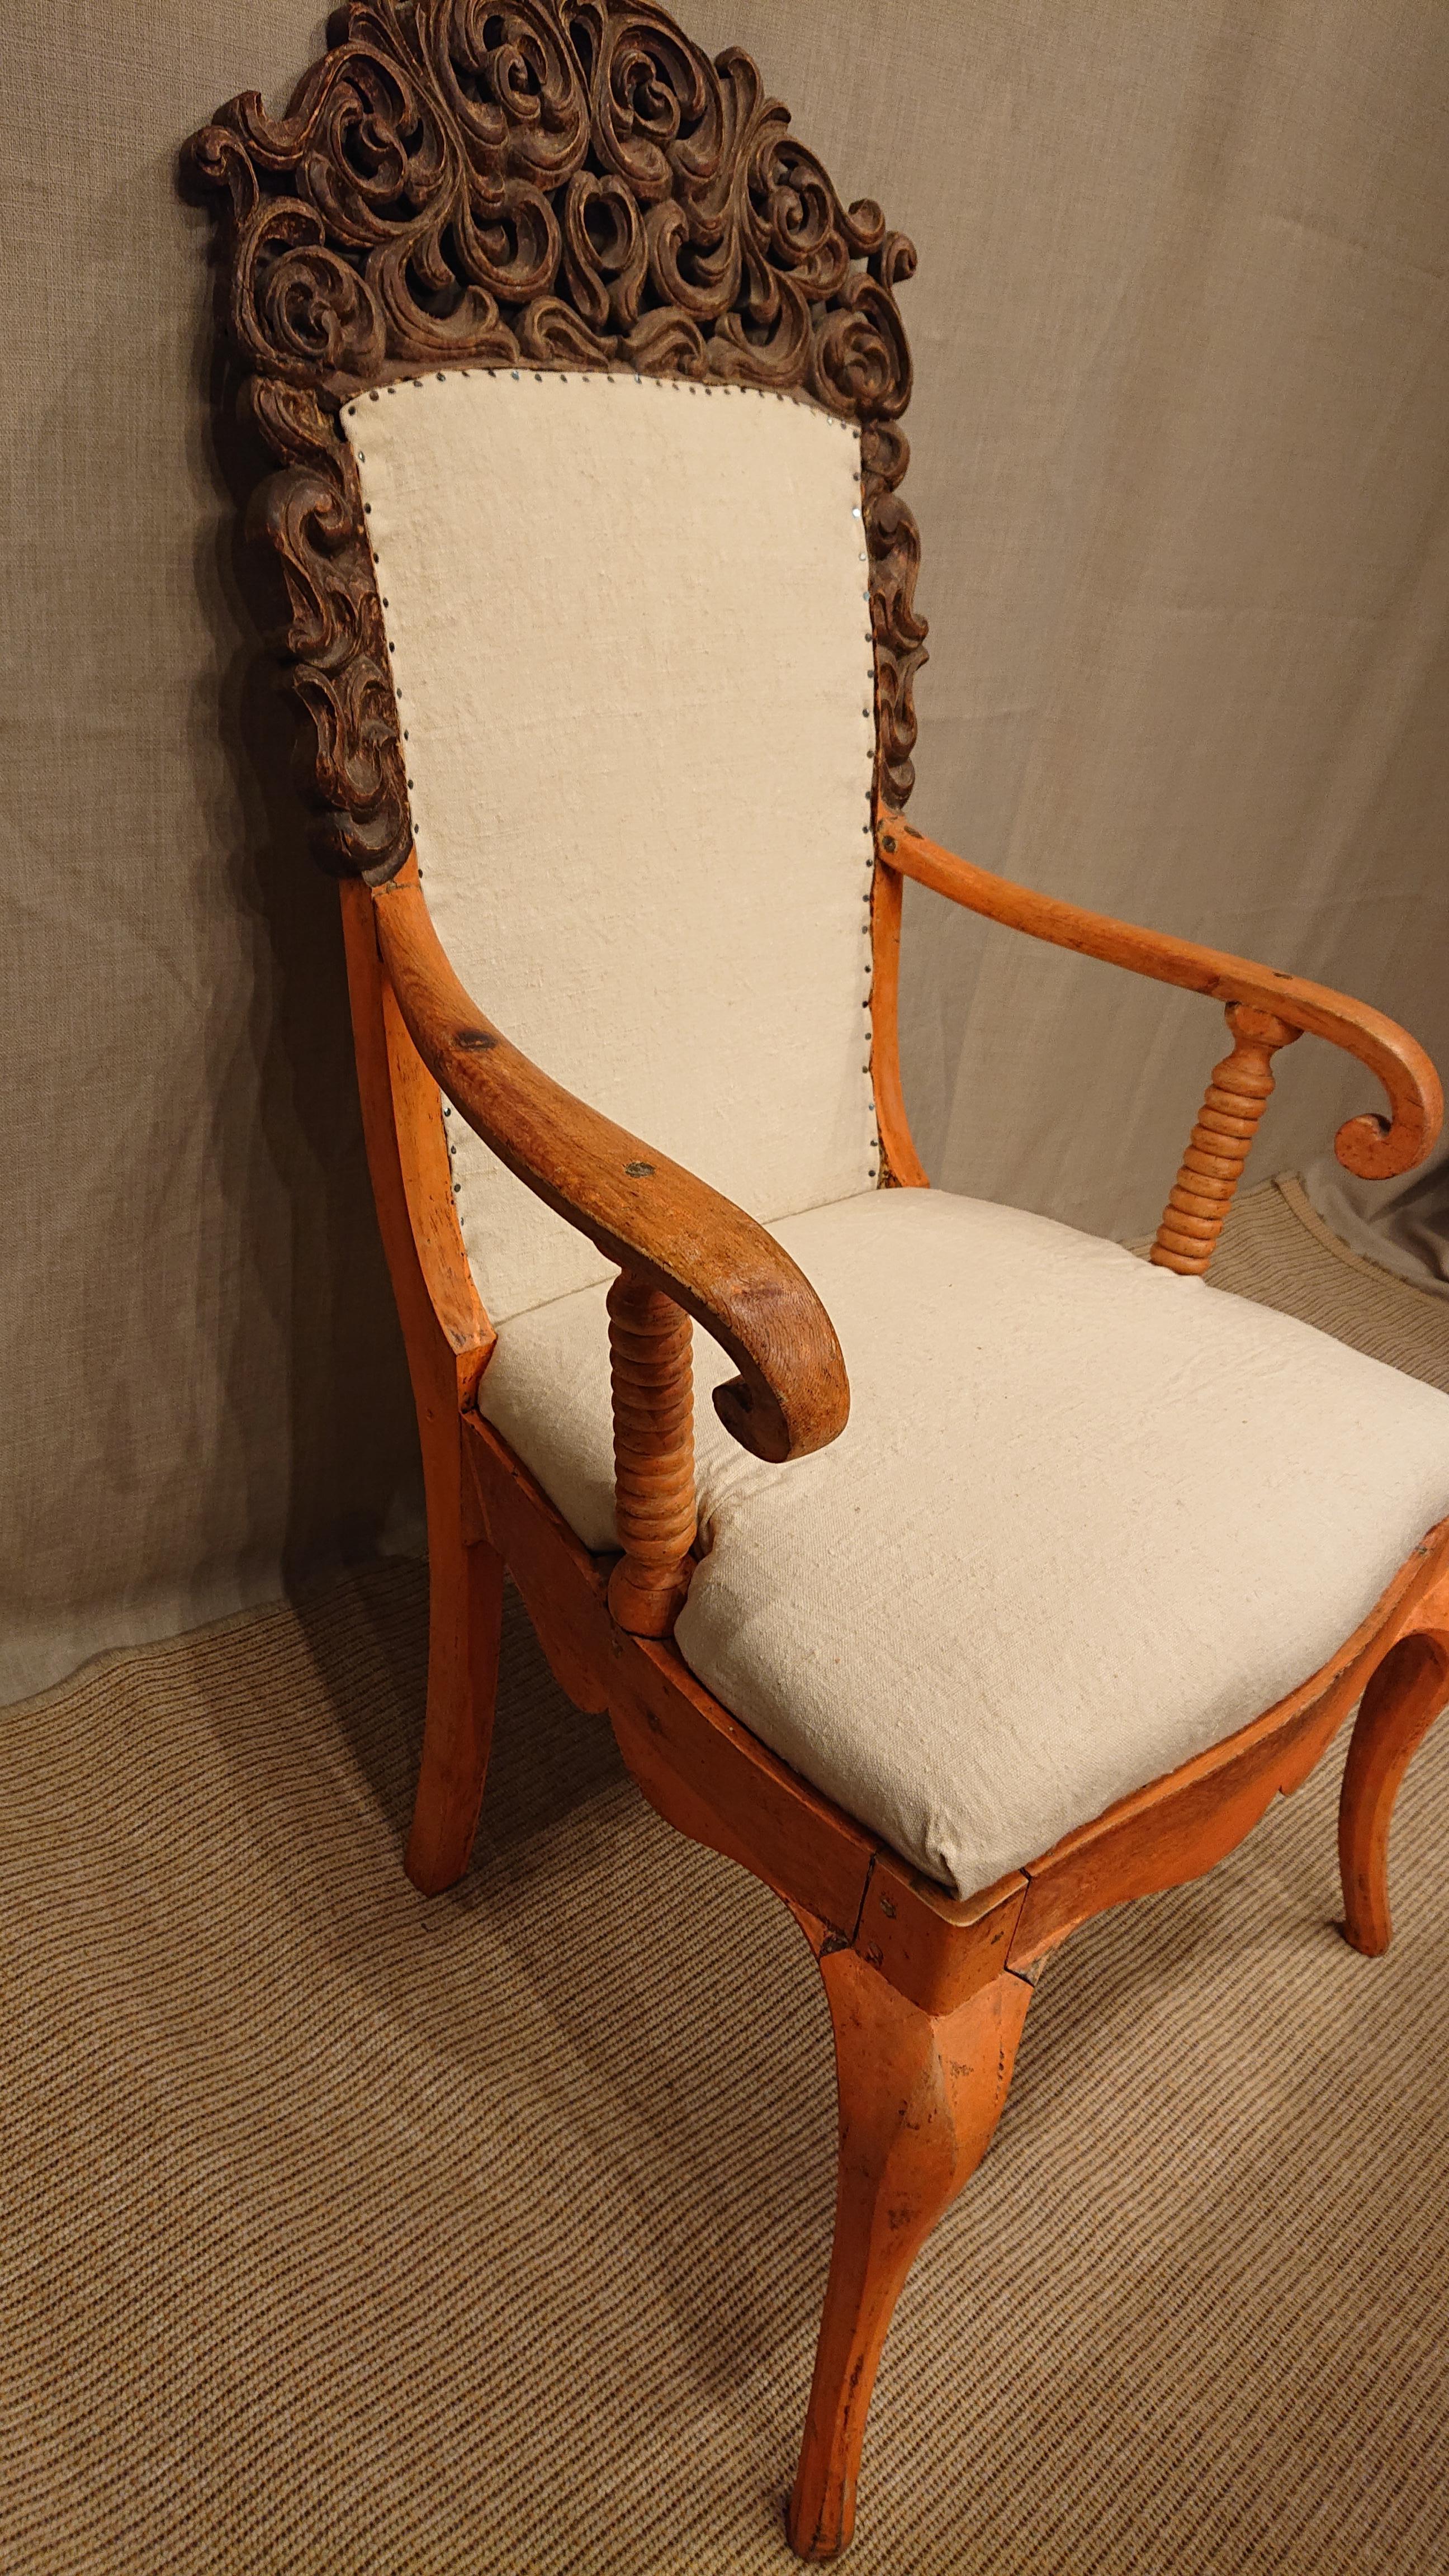 19th Century Swedish Late Baroque Style Upholstered Arm-Chair with Originalpaint For Sale 2